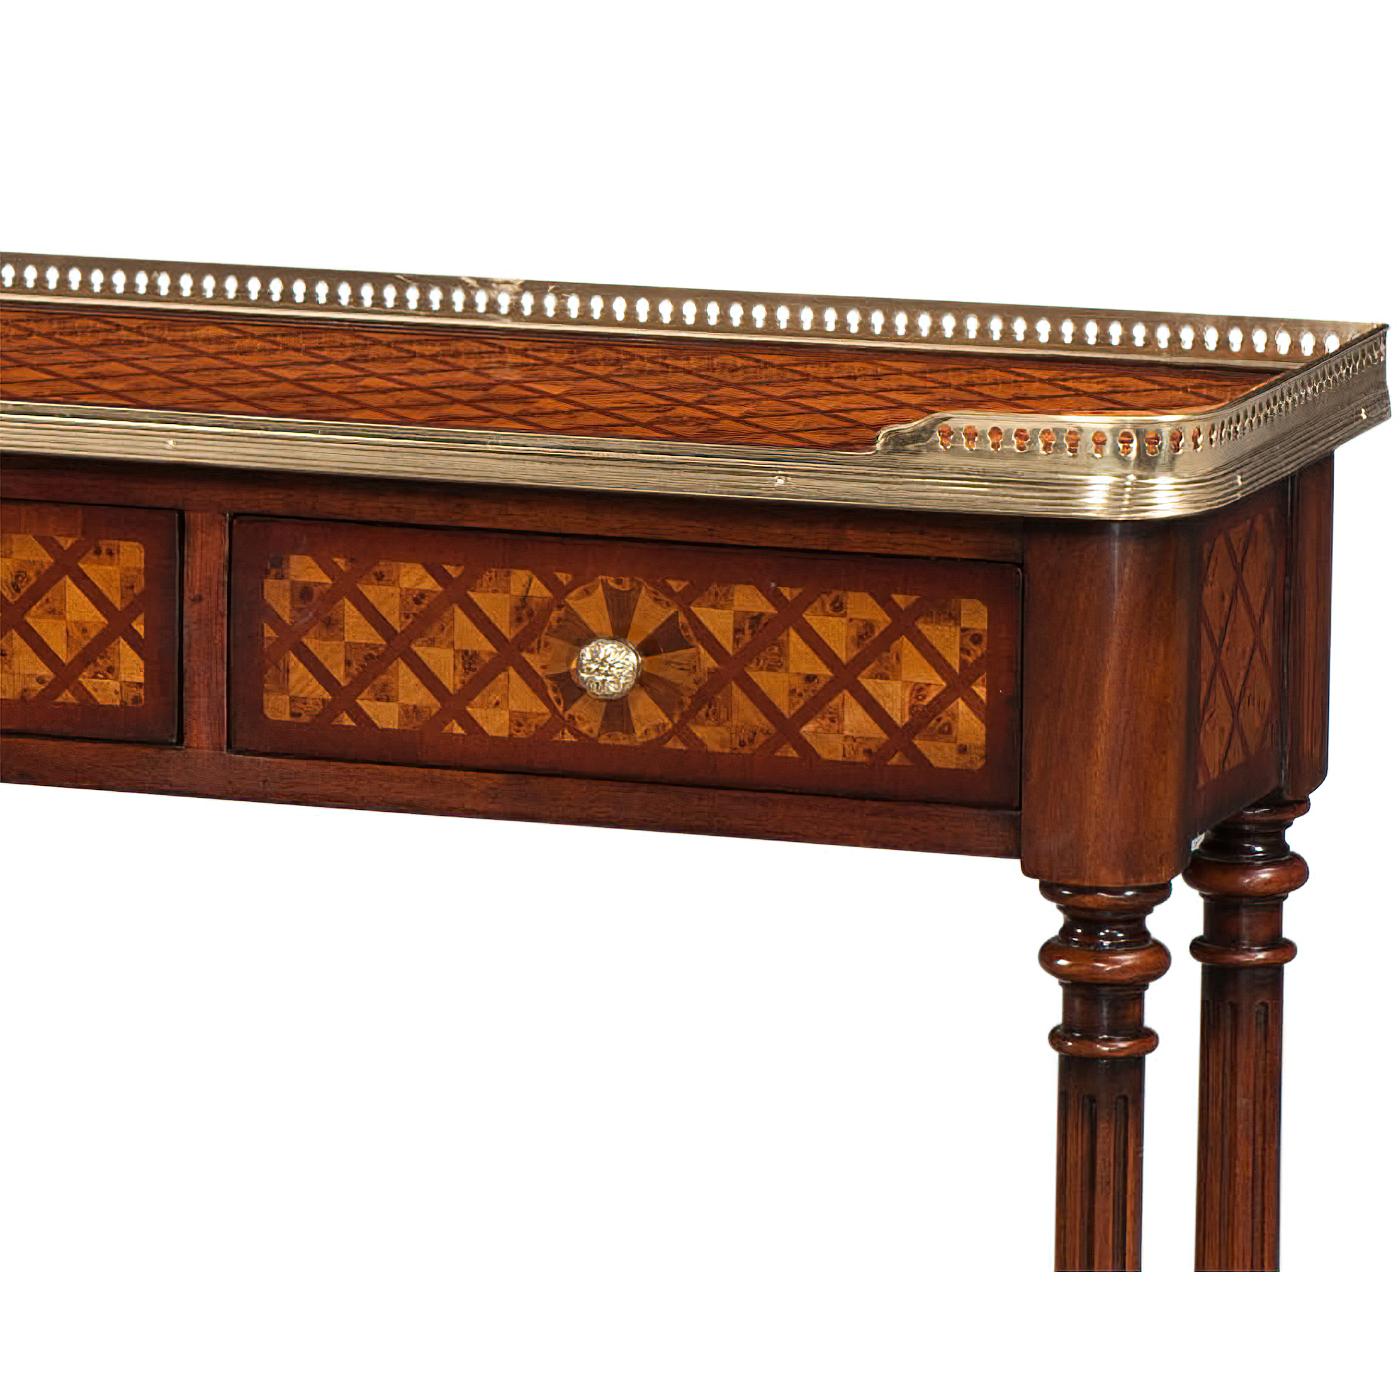 Louis XVI Parquetry console table. A burl lattice parquetry, brass mounted console table having a pierced brass gallery to the top and lower shelf, four frieze drawers, on turned and fluted legs joined by an under tier. 

Dimensions: 58.25